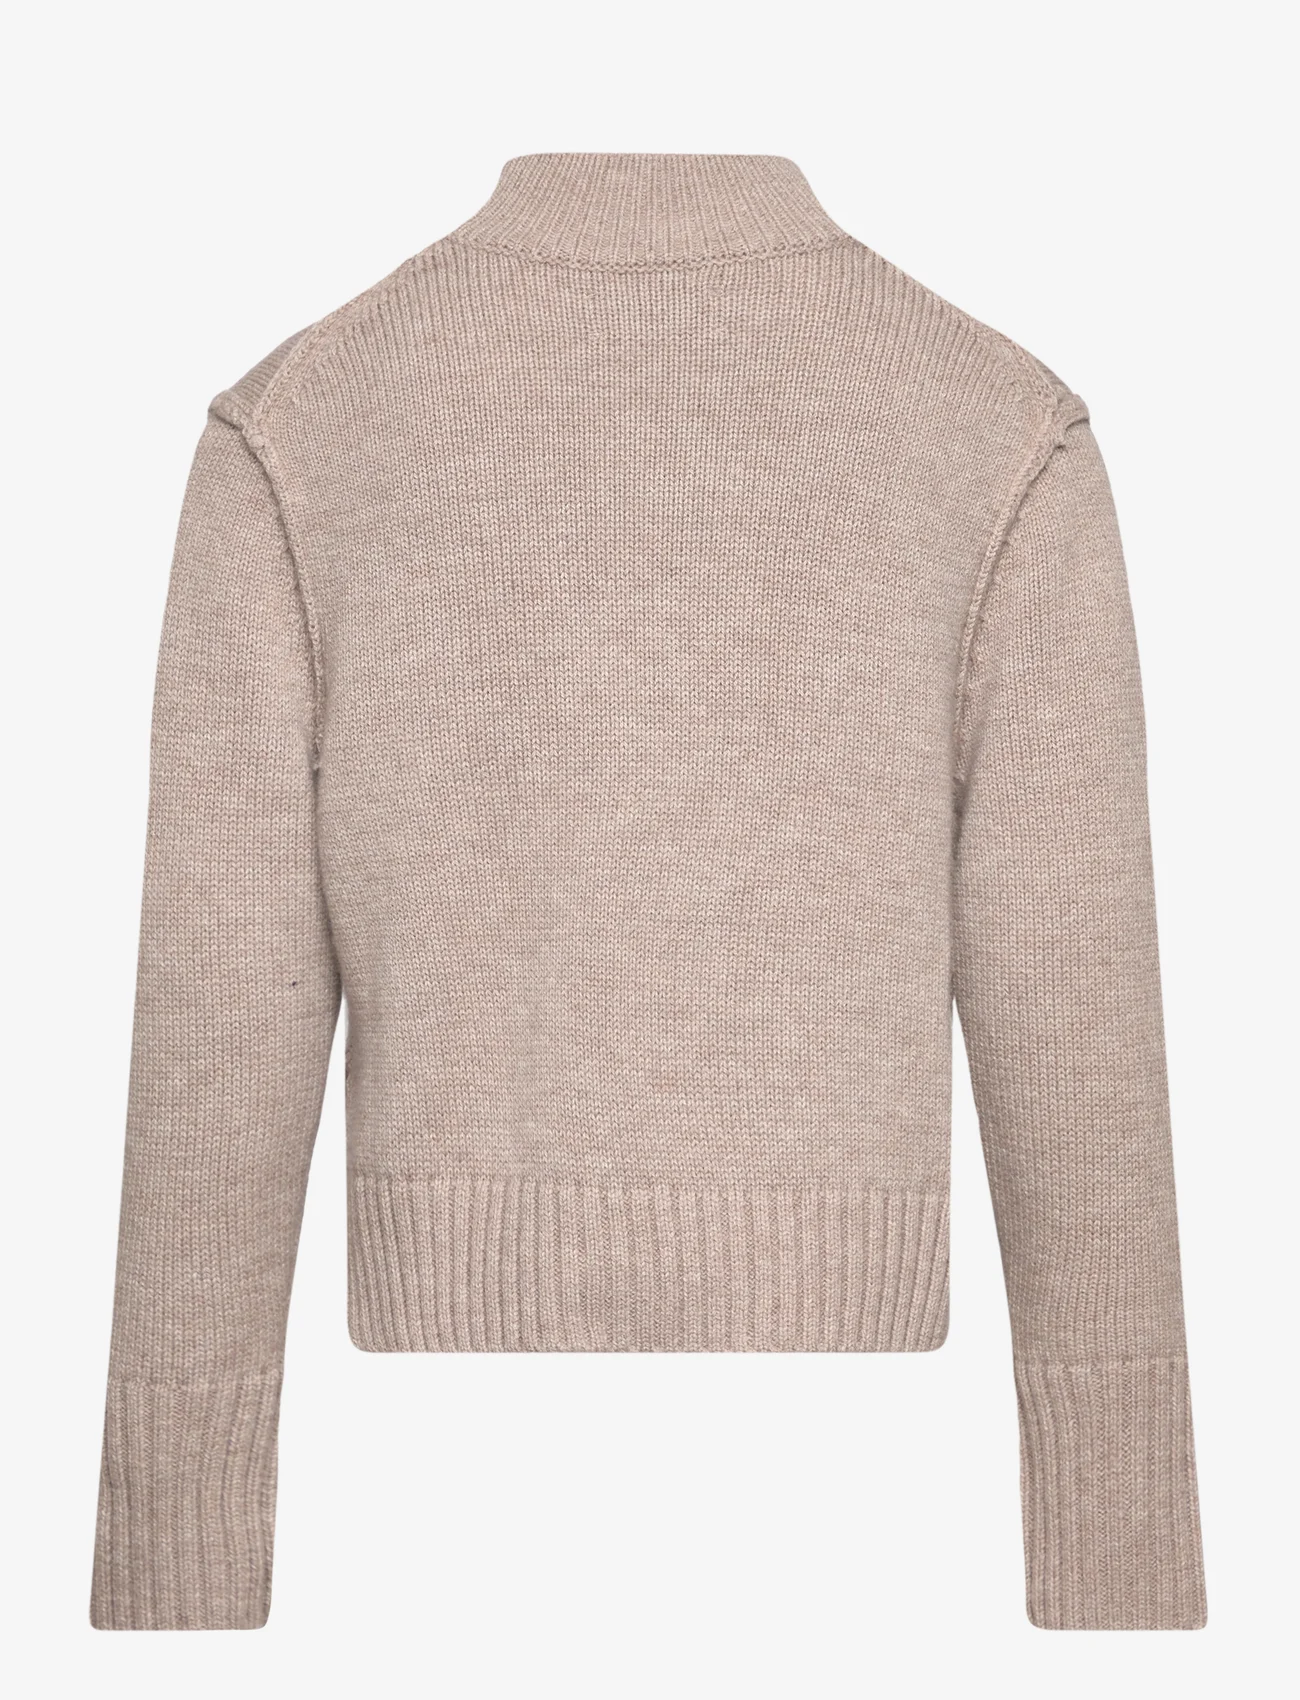 Zadig & Voltaire Kids - POLO NECK SWEATER OR JUMPER - jumpers - chine beige - 1